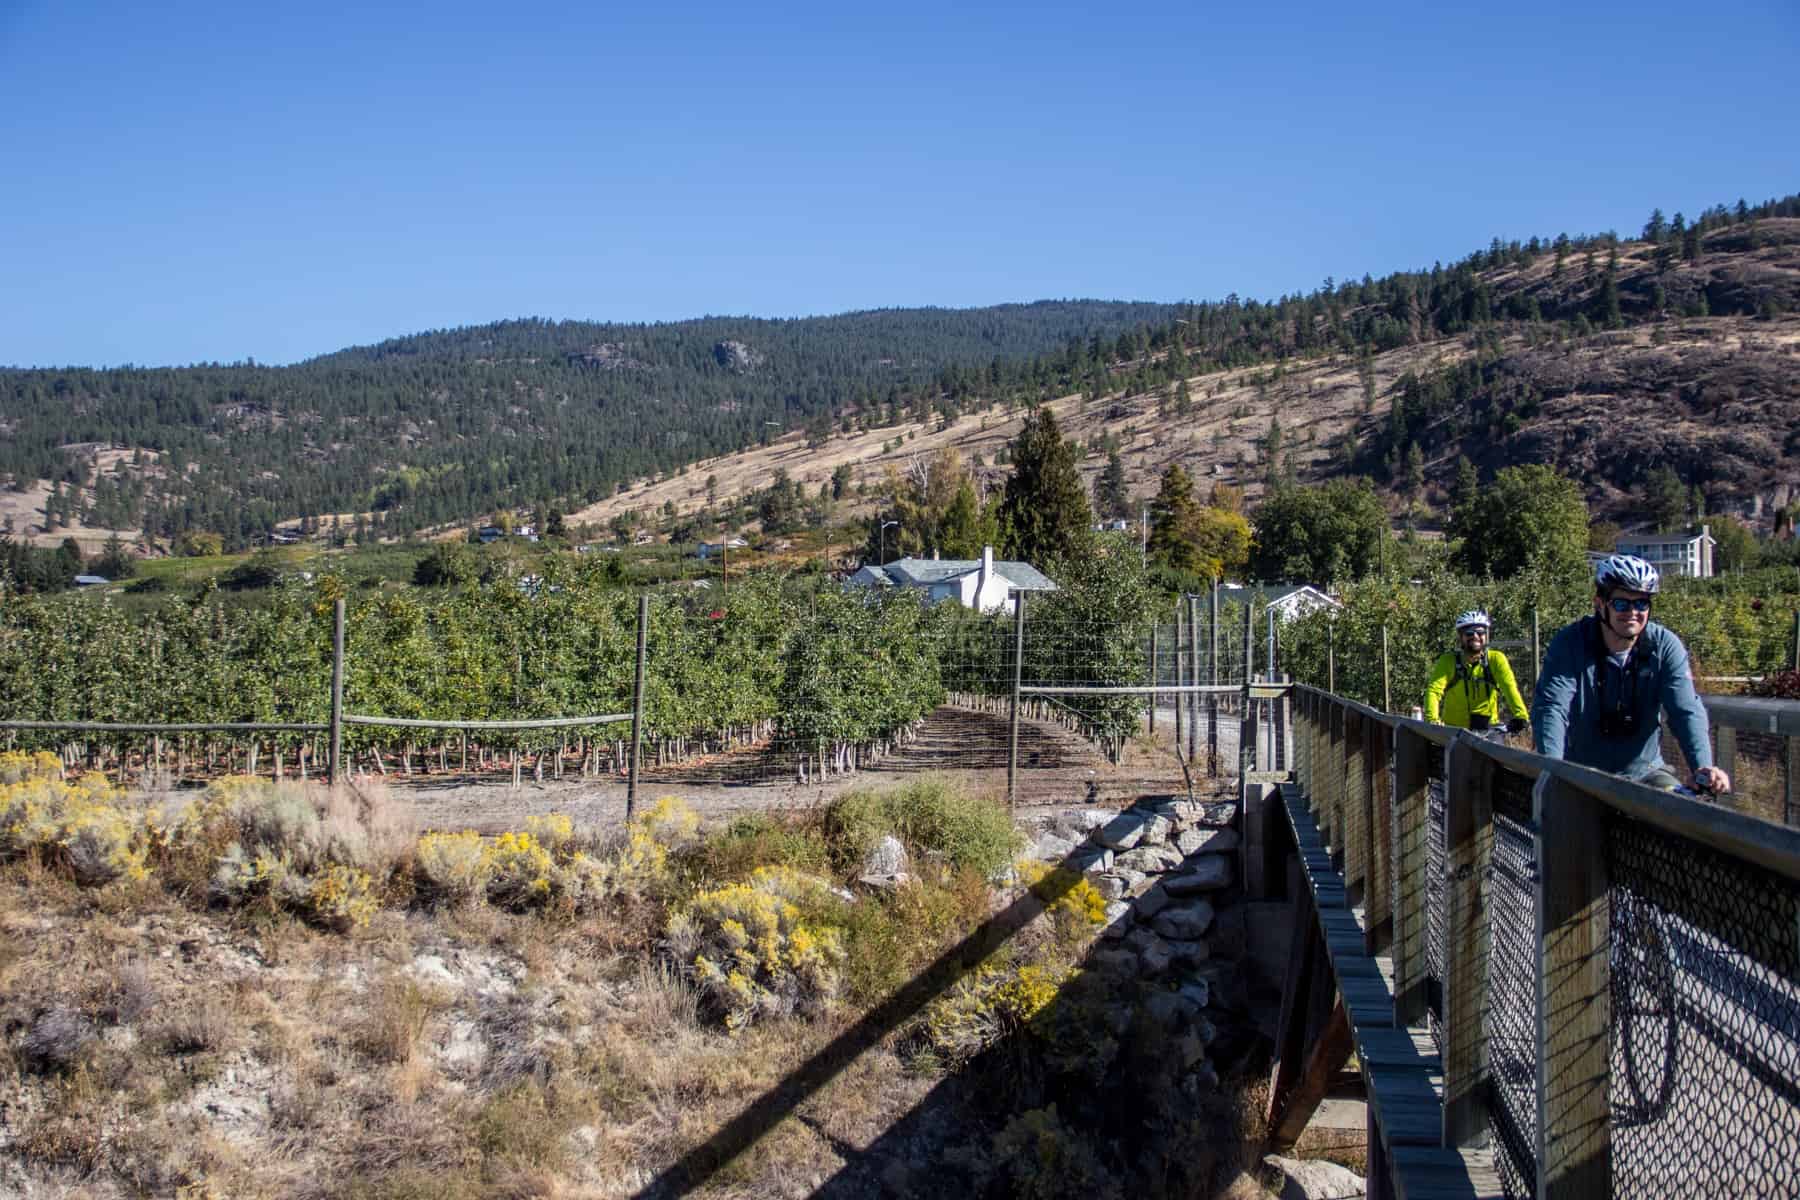 Two cyclists cross a bridges to a backdrop of vineyards and a hilly forest on the Kettle Valley Railway Trail.